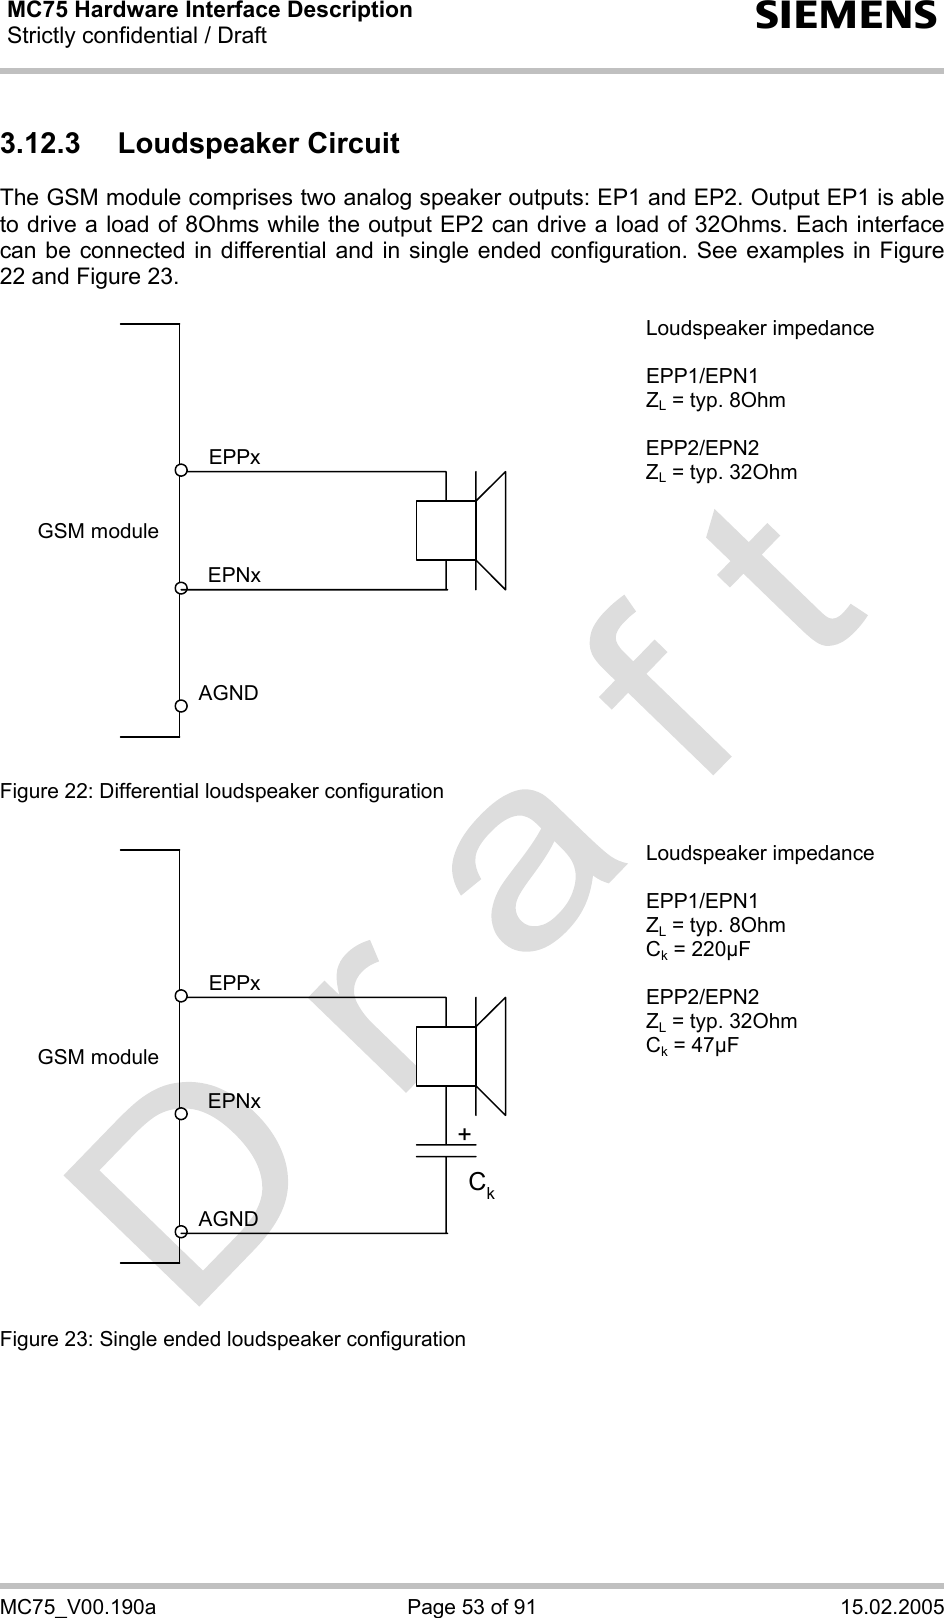 MC75 Hardware Interface Description Strictly confidential / Draft  s MC75_V00.190a  Page 53 of 91  15.02.2005 3.12.3 Loudspeaker Circuit The GSM module comprises two analog speaker outputs: EP1 and EP2. Output EP1 is able to drive a load of 8Ohms while the output EP2 can drive a load of 32Ohms. Each interface can be connected in differential and in single ended configuration. See examples in Figure 22 and Figure 23.  GSM moduleAGNDEPNxEPPx  Figure 22: Differential loudspeaker configuration Loudspeaker impedance  EPP1/EPN1 ZL = typ. 8Ohm  EPP2/EPN2 ZL = typ. 32Ohm  GSM moduleAGNDEPNxEPPx+Ck  Figure 23: Single ended loudspeaker configuration Loudspeaker impedance  EPP1/EPN1 ZL = typ. 8Ohm Ck = 220µF  EPP2/EPN2 ZL = typ. 32Ohm Ck = 47µF     